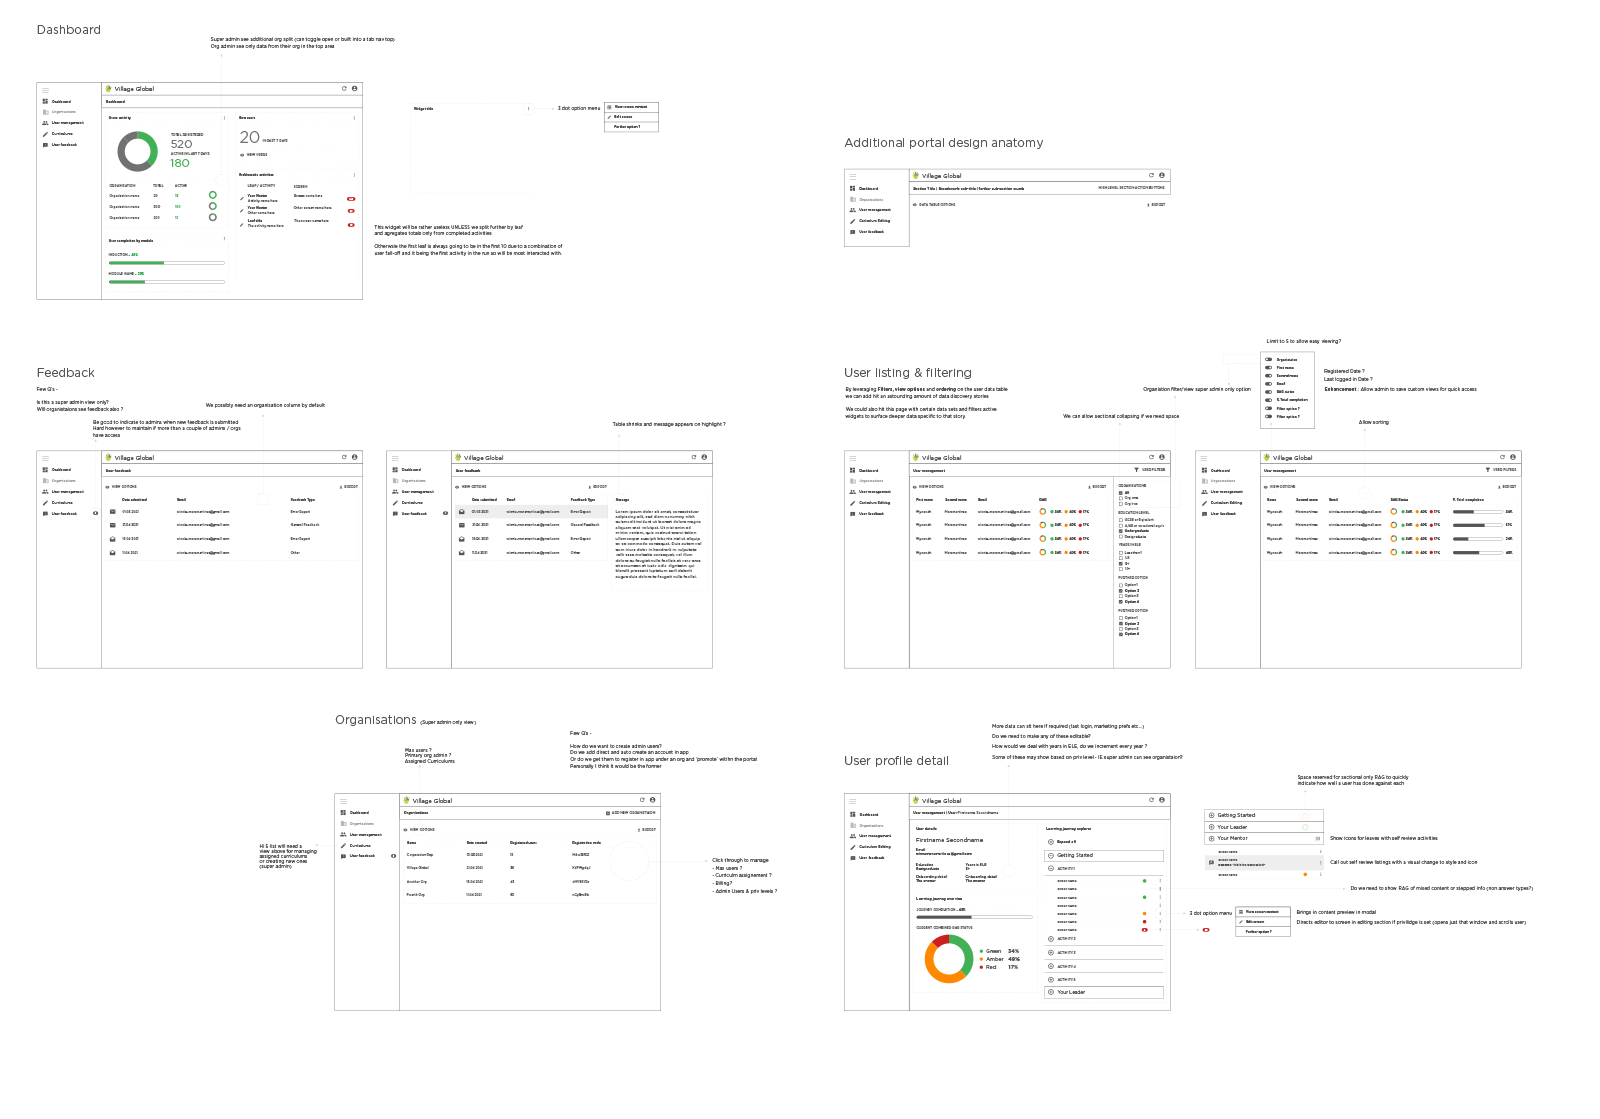 CMS wireframes for the user administration & analytics portal